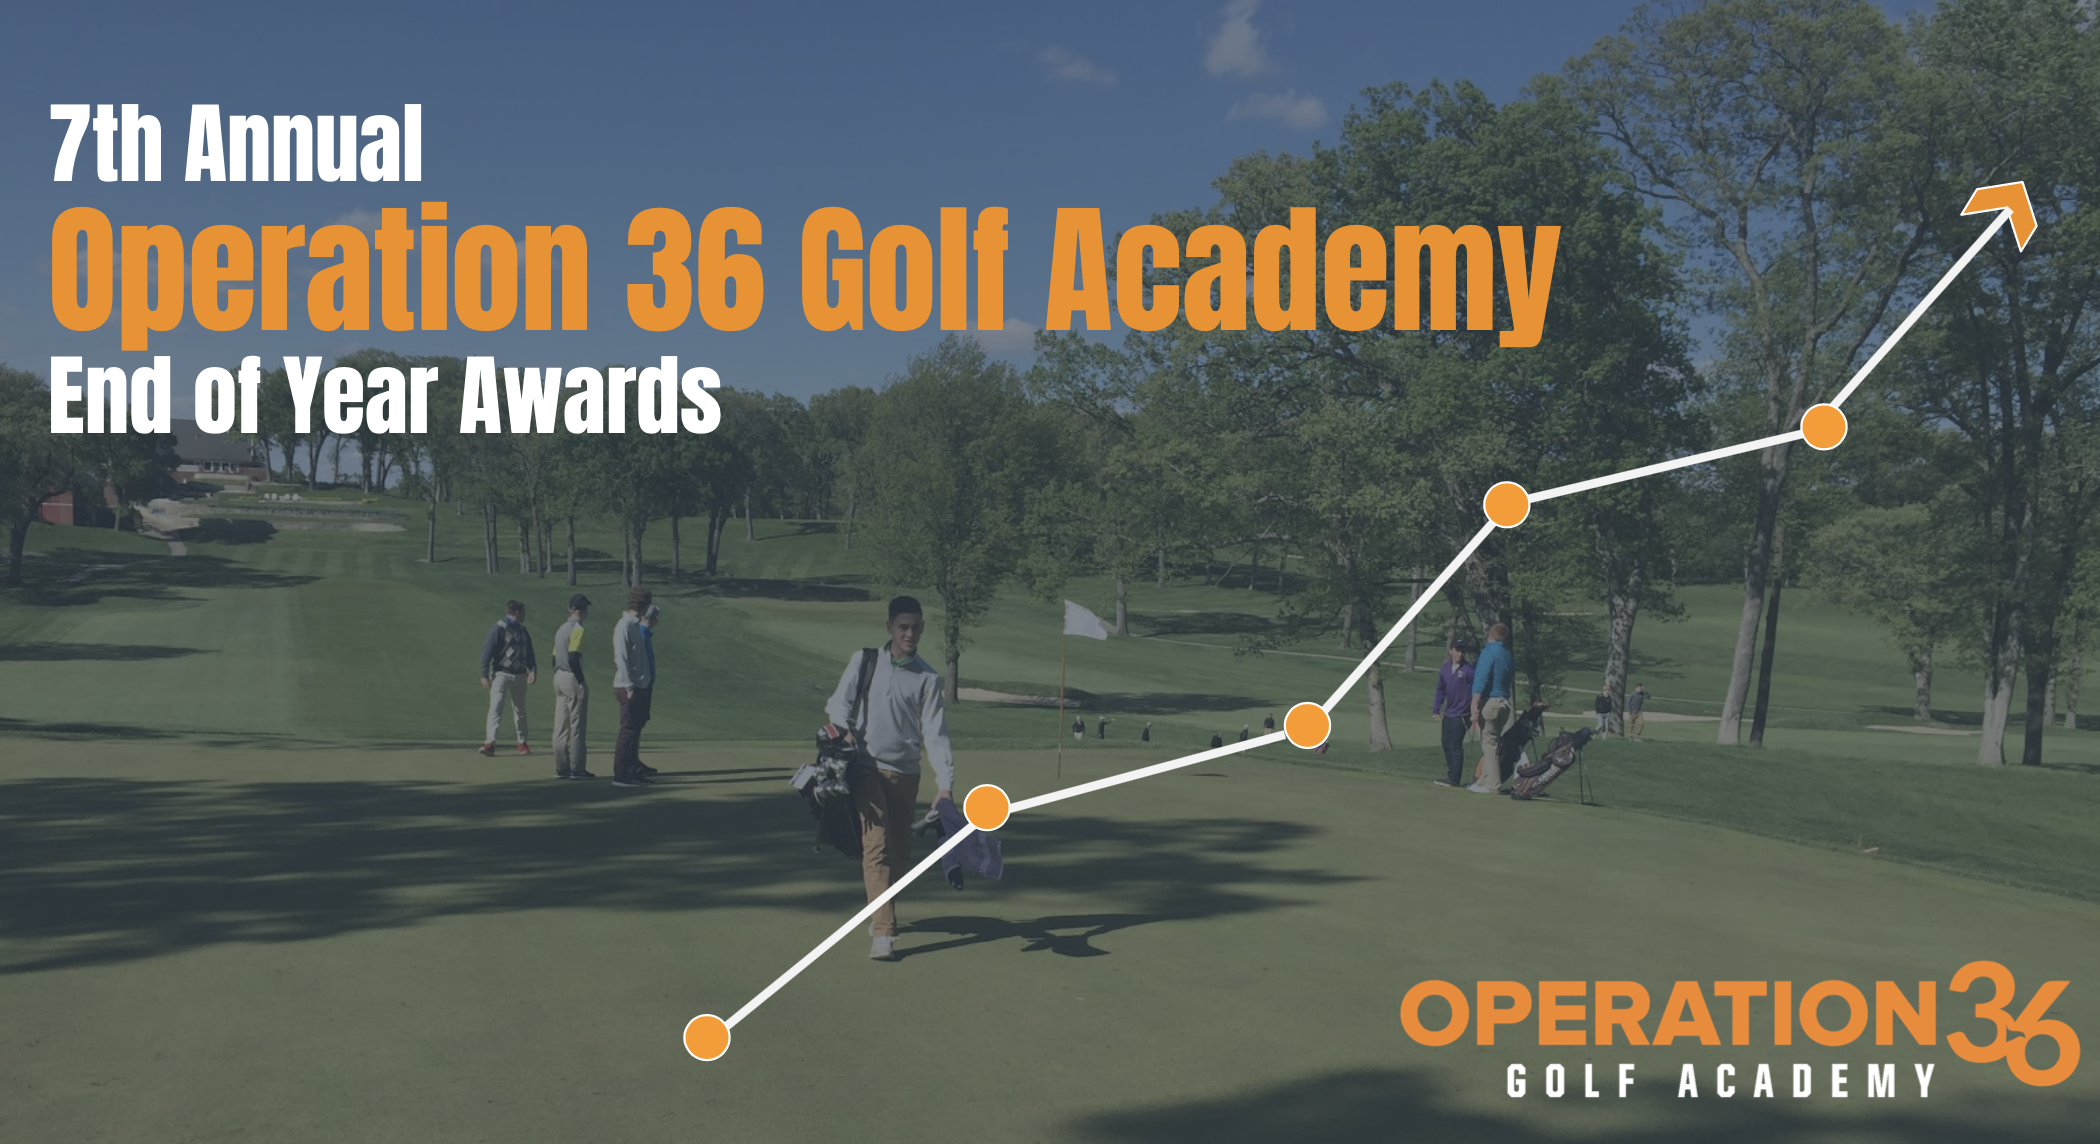 7th Annual Operation 36 Golf Academy End of Year Awards for Keith Hills